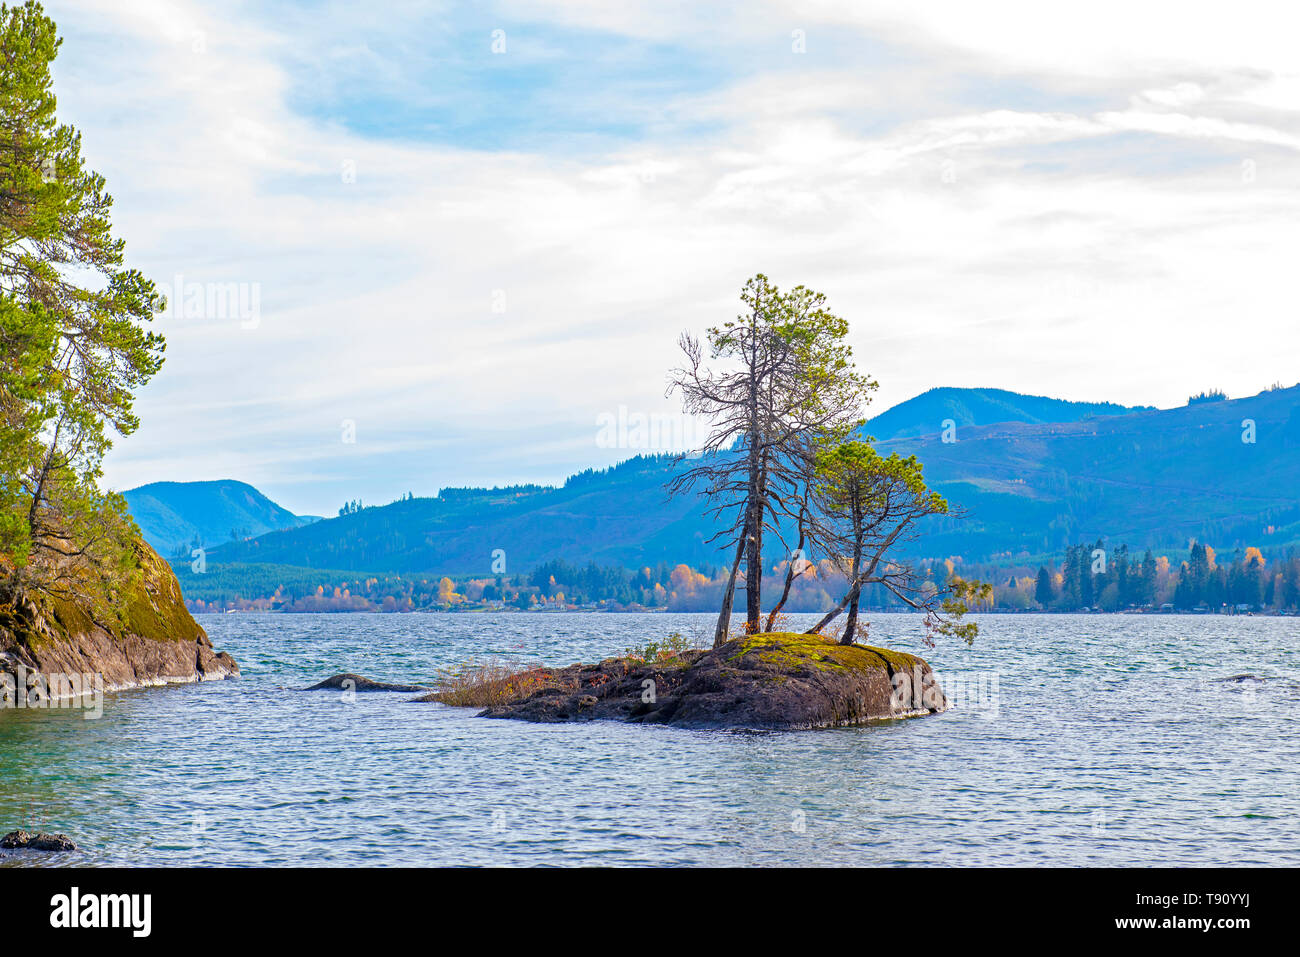 View of Gordon Bay Park in Cowichan Lake during the fall, taken on Vancouver Island, canada Stock Photo